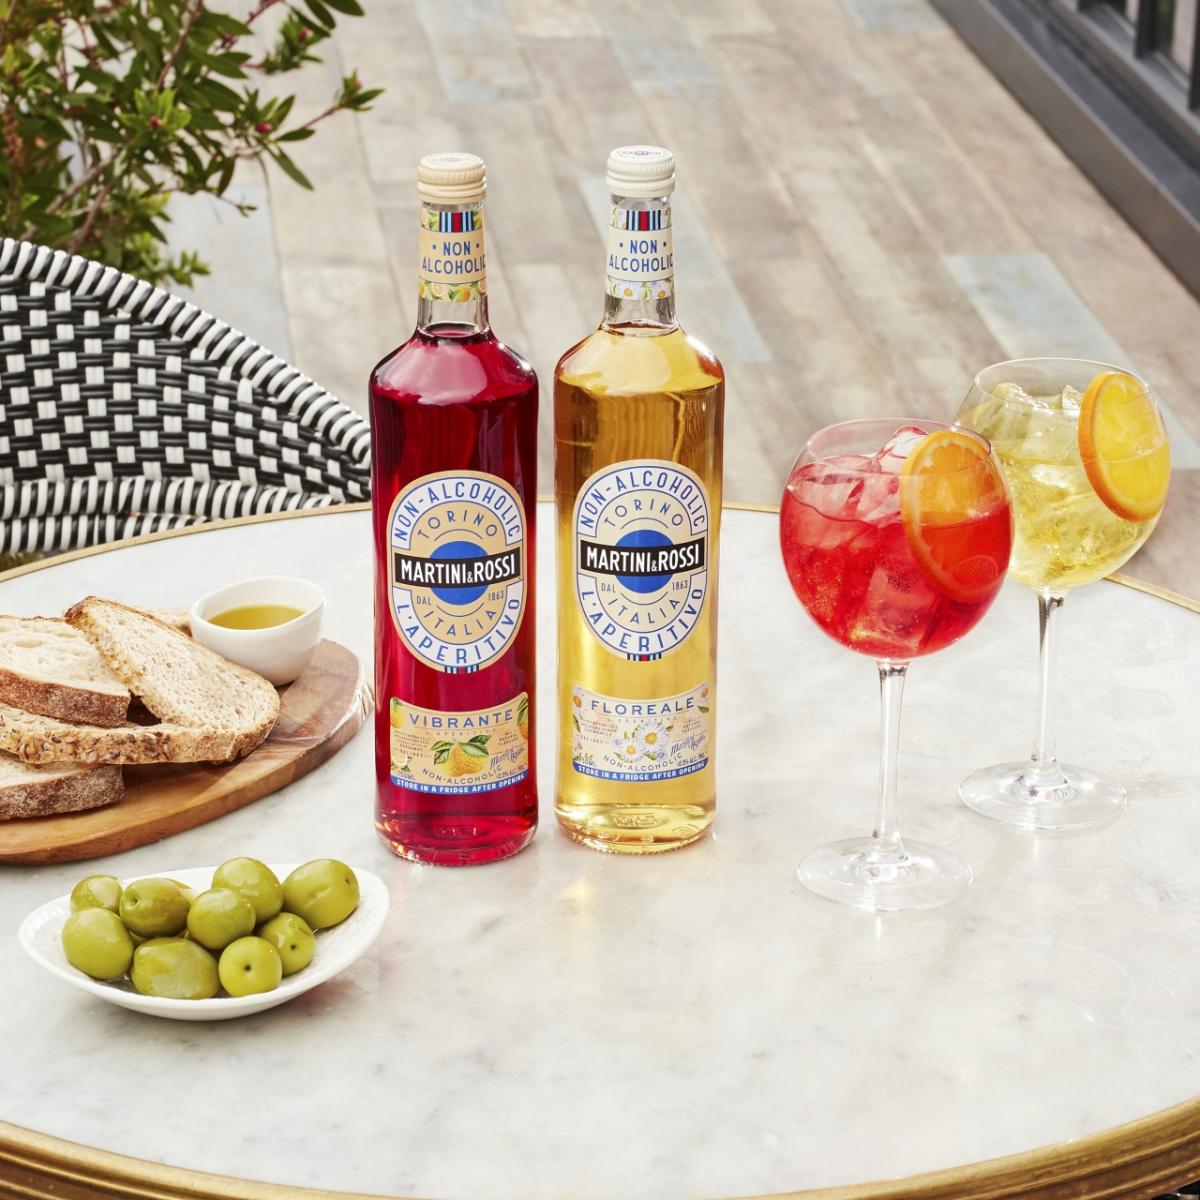 Bottles of MARINTI Non-Alcoholic Aperitivo and Floreale on a table with snacks